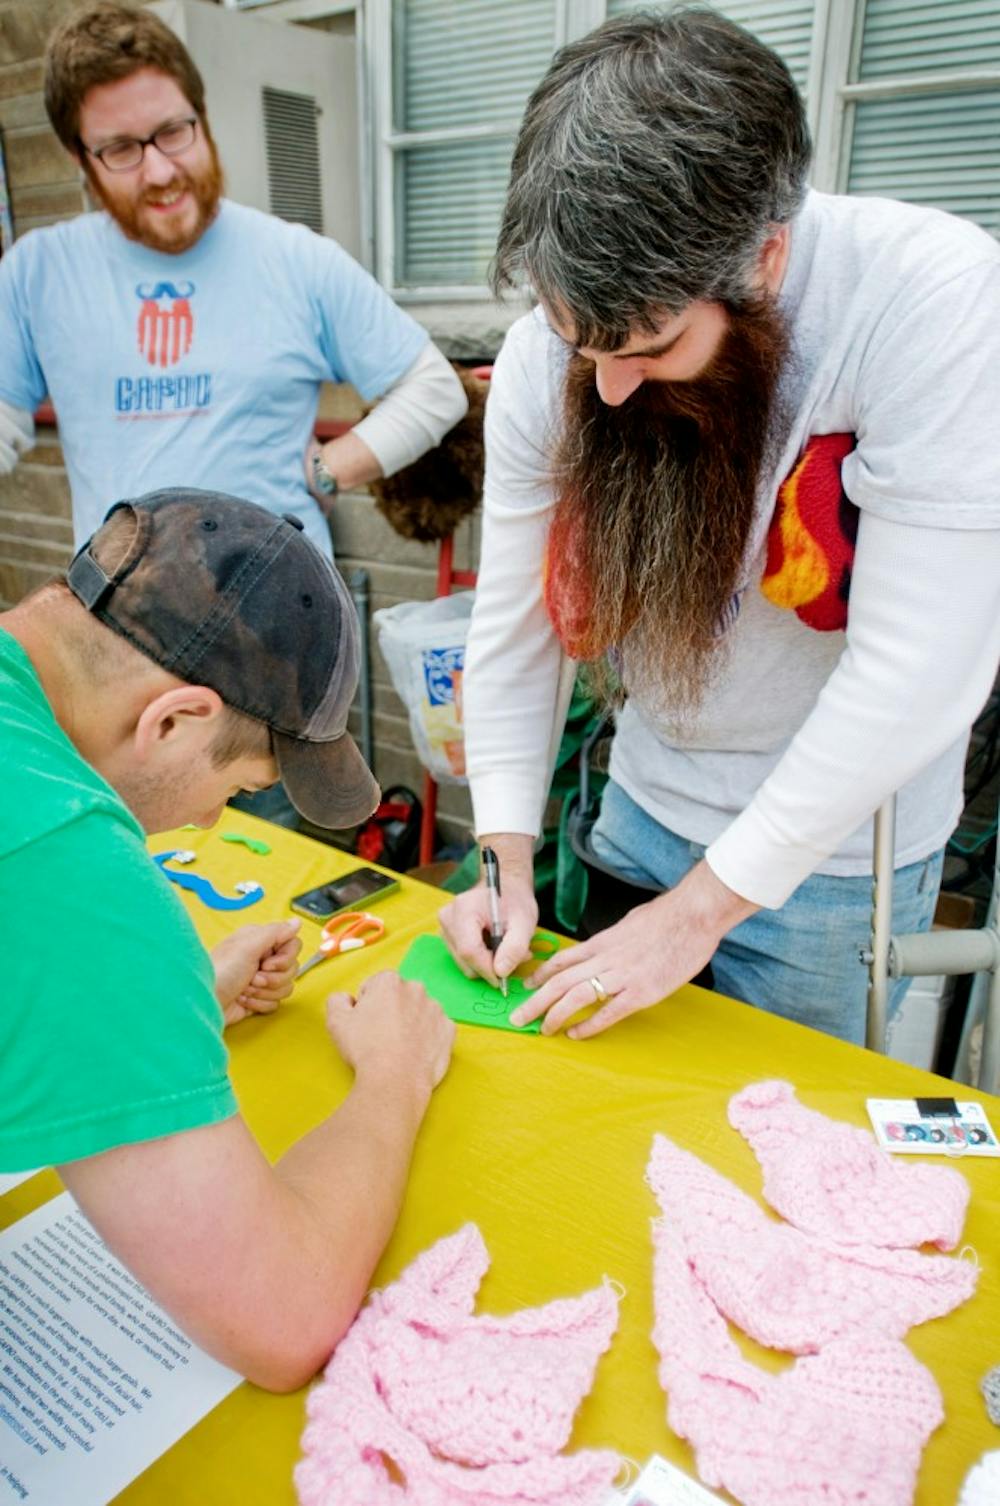 MSU alumni Ian Walker, left, and John Buckler, right, run an arts and crafts table on Saturday in downtown East Lansing as local non-profit organizations gather to raise awareness. The pair arrived representing the Great American Fierce Beard Organization as they cut paper mustaches and sold cloth beards to attendees such as Lansing resident Justin Caine, pictured. Mo Hnatiuk/The State News